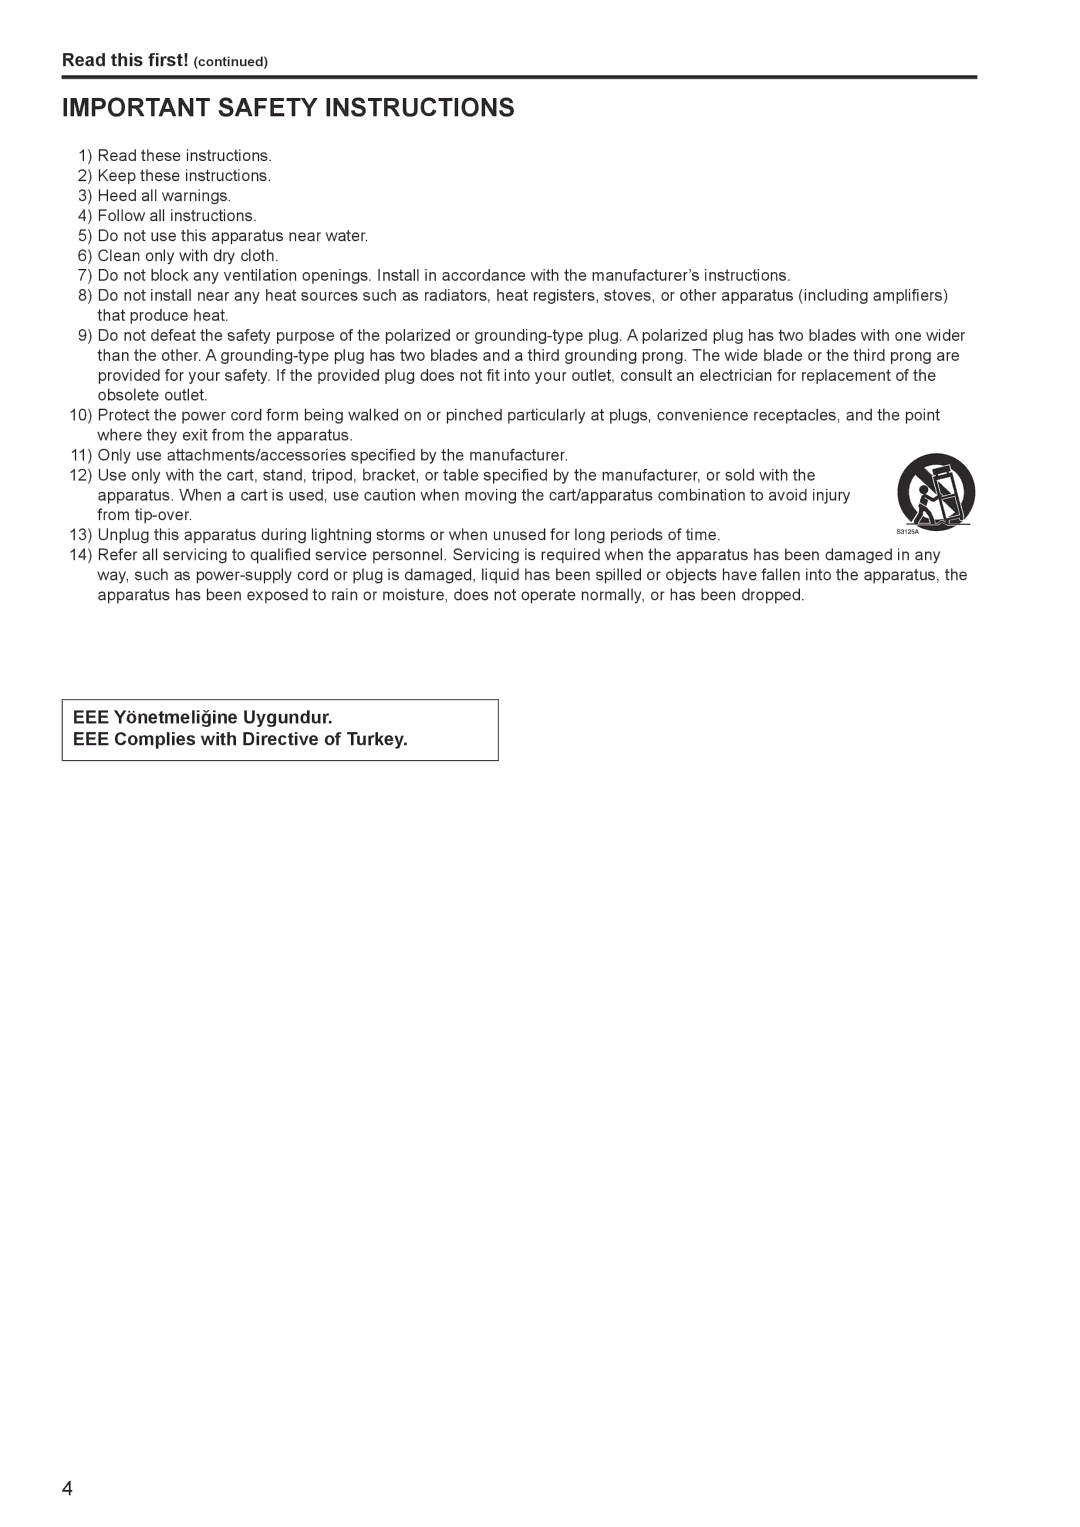 Panasonic AW-RP120G operating instructions Important Safety Instructions 